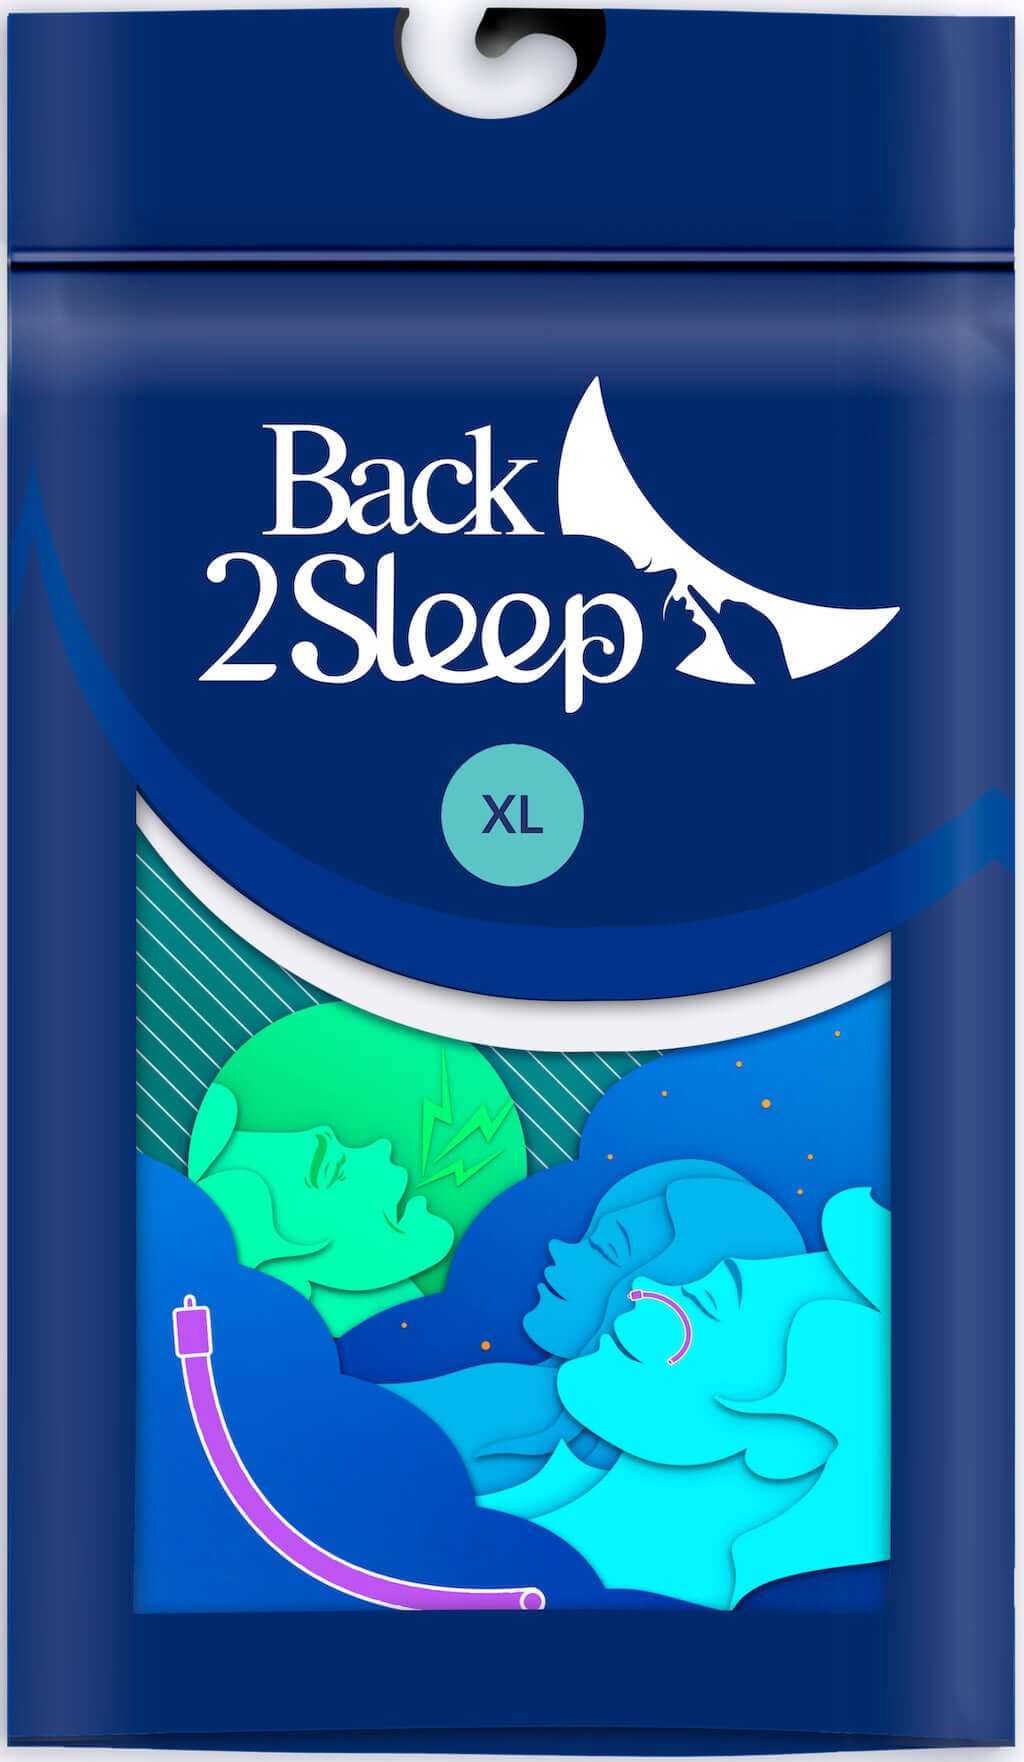 Back2Sleep for snoring and sleep apnea, size XL, for one month of use.